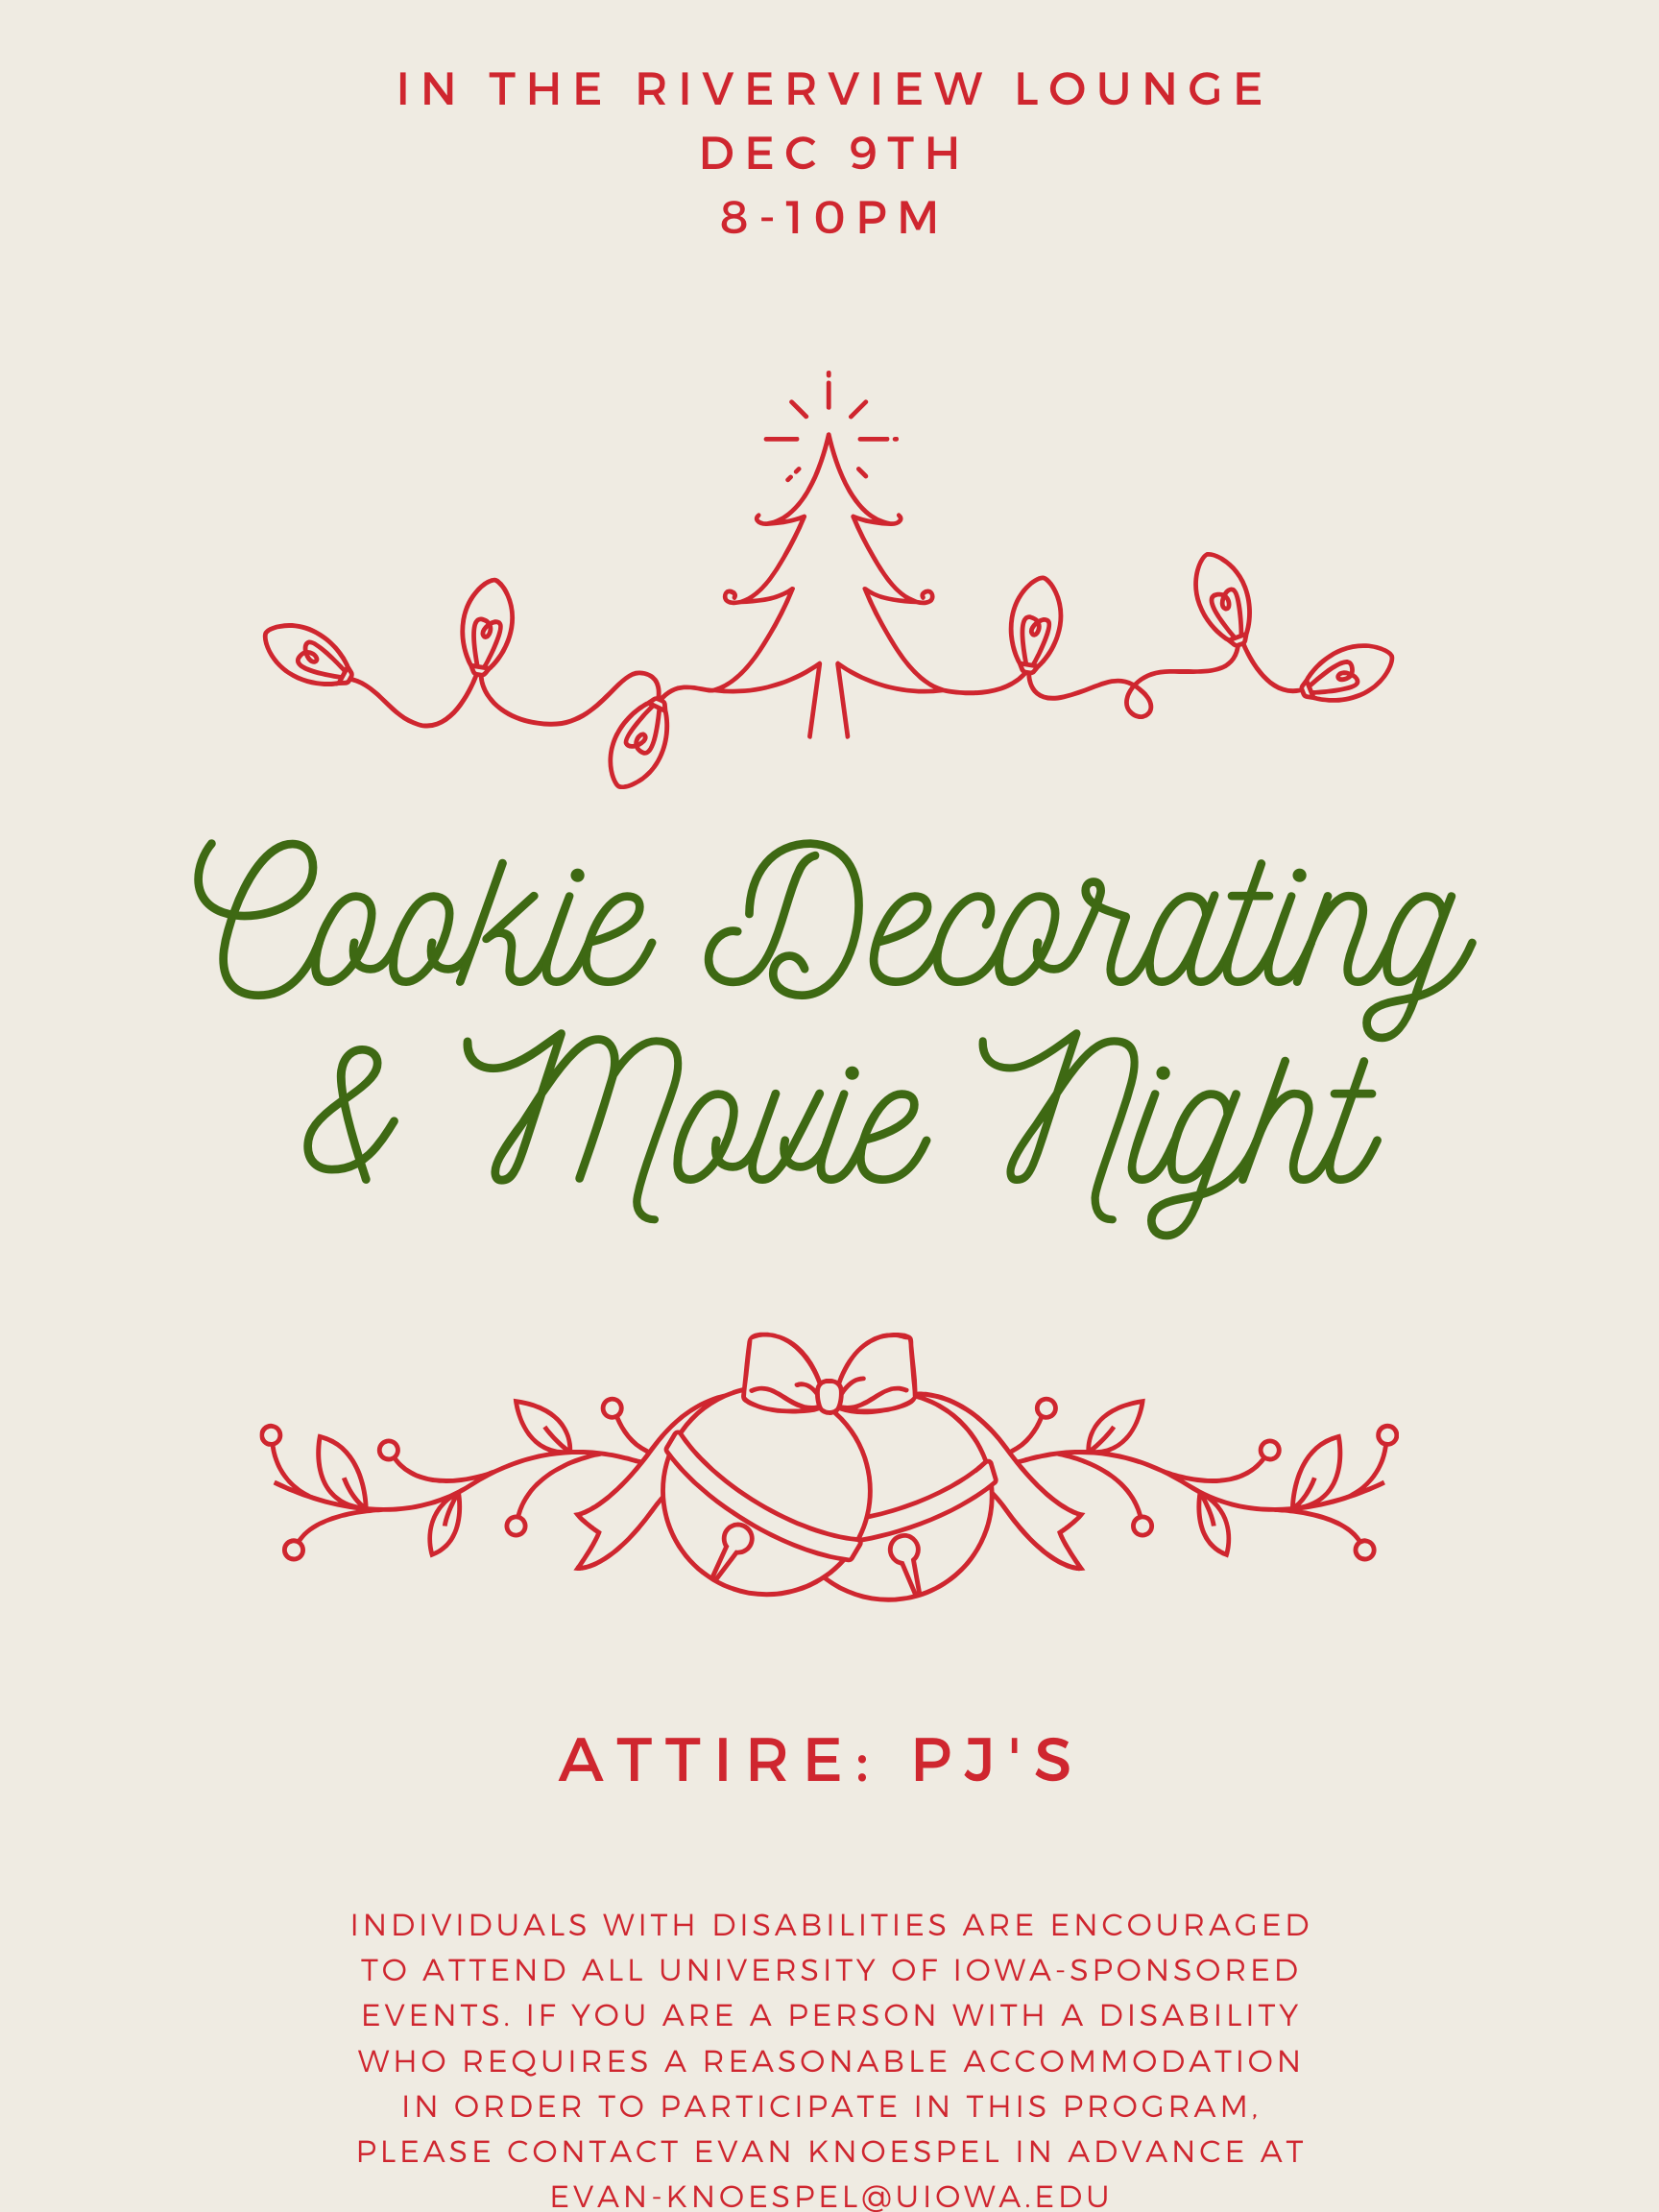 Join us at Hillcrest Hall on December 9th from 8-10PM for a night of holiday cookie decorating and movie watching!